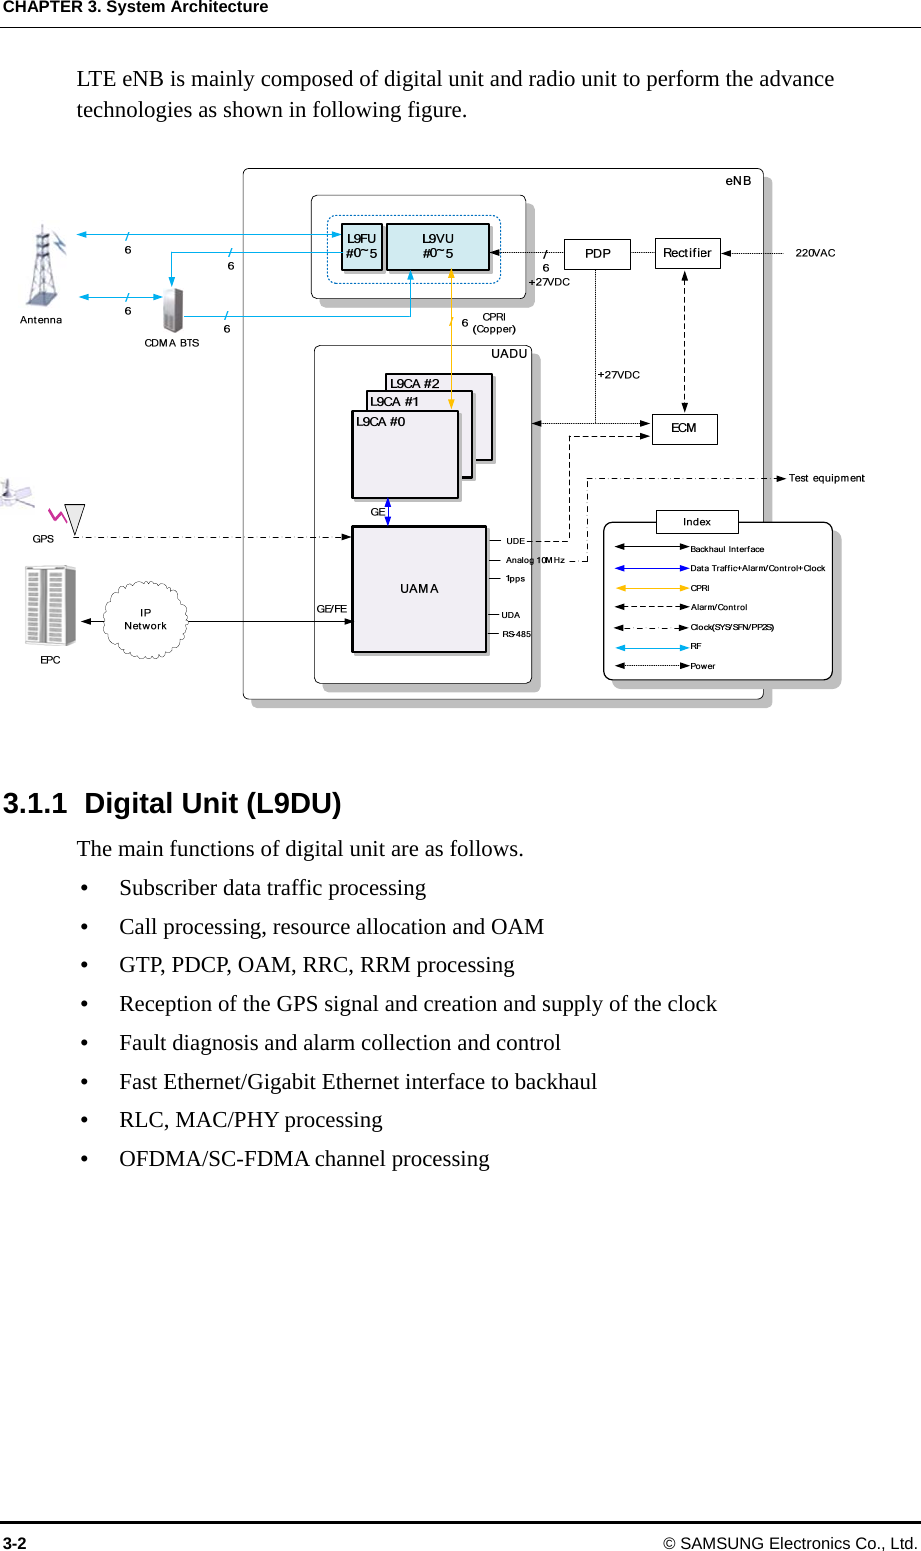 CHAPTER 3. System Architecture 3-2  © SAMSUNG Electronics Co., Ltd. LTE eNB is mainly composed of digital unit and radio unit to perform the advance technologies as shown in following figure.    3.1.1  Digital Unit (L9DU) The main functions of digital unit are as follows.  Subscriber data traffic processing  Call processing, resource allocation and OAM  GTP, PDCP, OAM, RRC, RRM processing    Reception of the GPS signal and creation and supply of the clock    Fault diagnosis and alarm collection and control  Fast Ethernet/Gigabit Ethernet interface to backhaul  RLC, MAC/PHY processing    OFDMA/SC-FDMA channel processing   